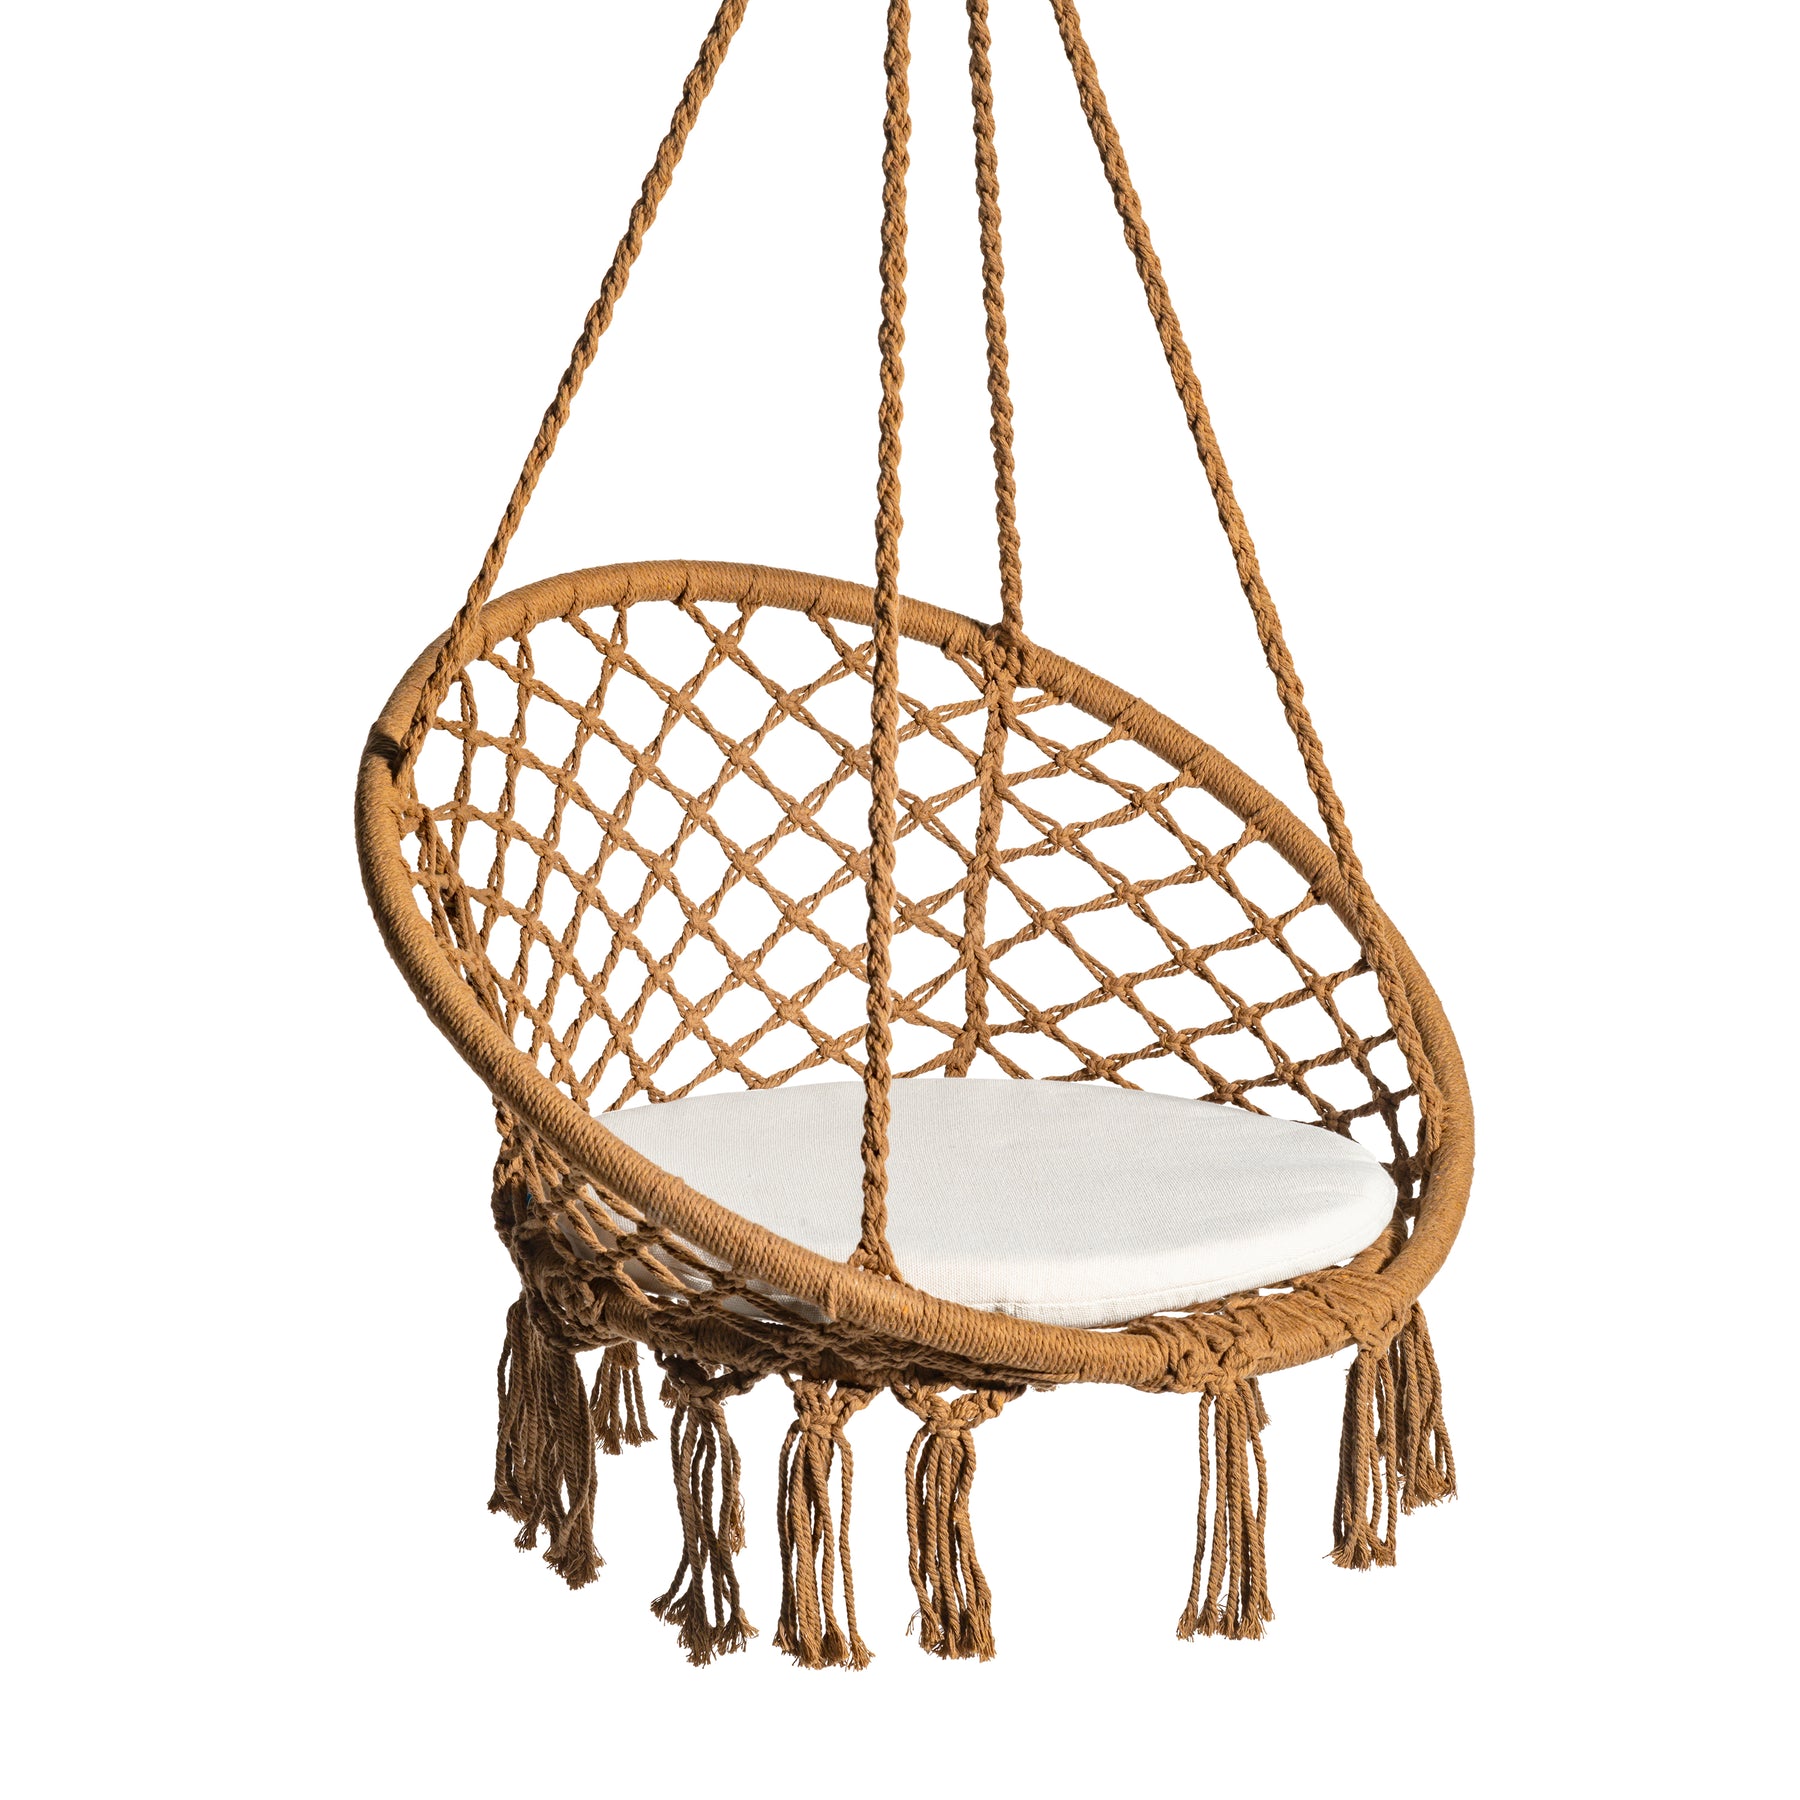 Bliss Hammocks 31.5-inch Wide Macramé Swing Chair with Fringe lining and Padded Cushion in the brown variation.